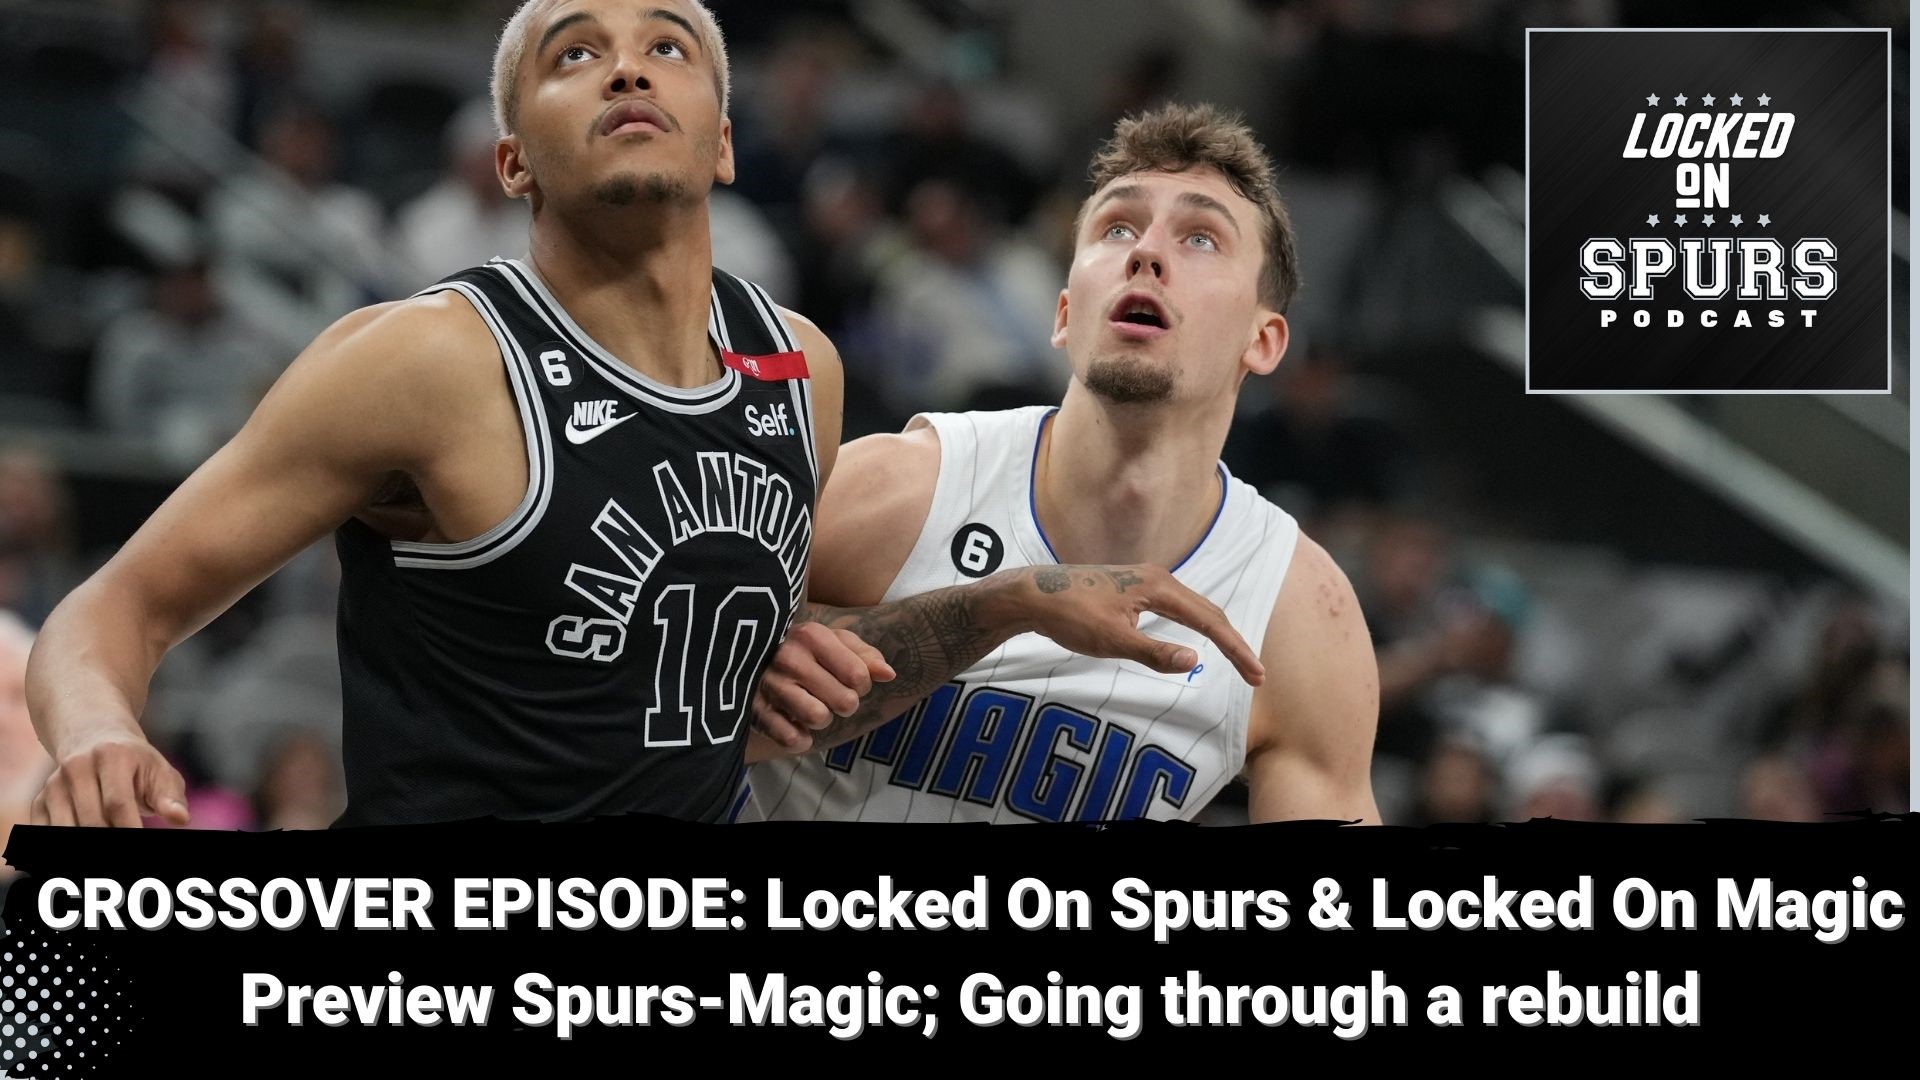 The hosts of Locked On Spurs and Locked On Magic team up to discuss tonight's Spurs-Magic game and more.